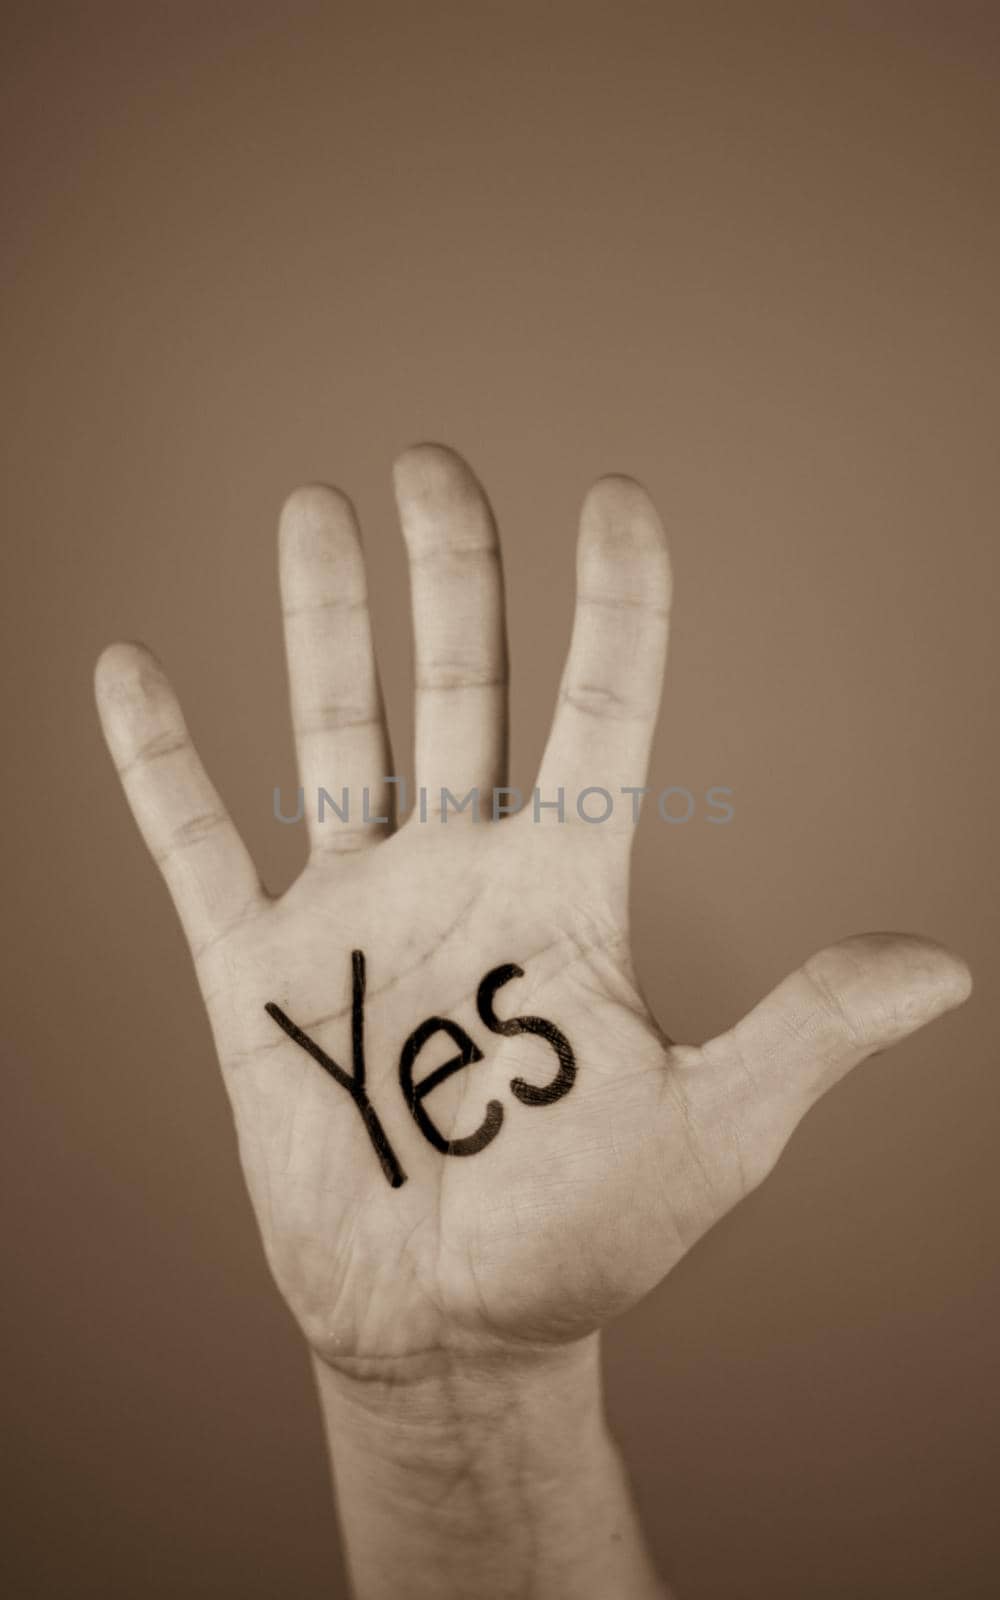 man showing the word "yes" written on the palm of a his hand